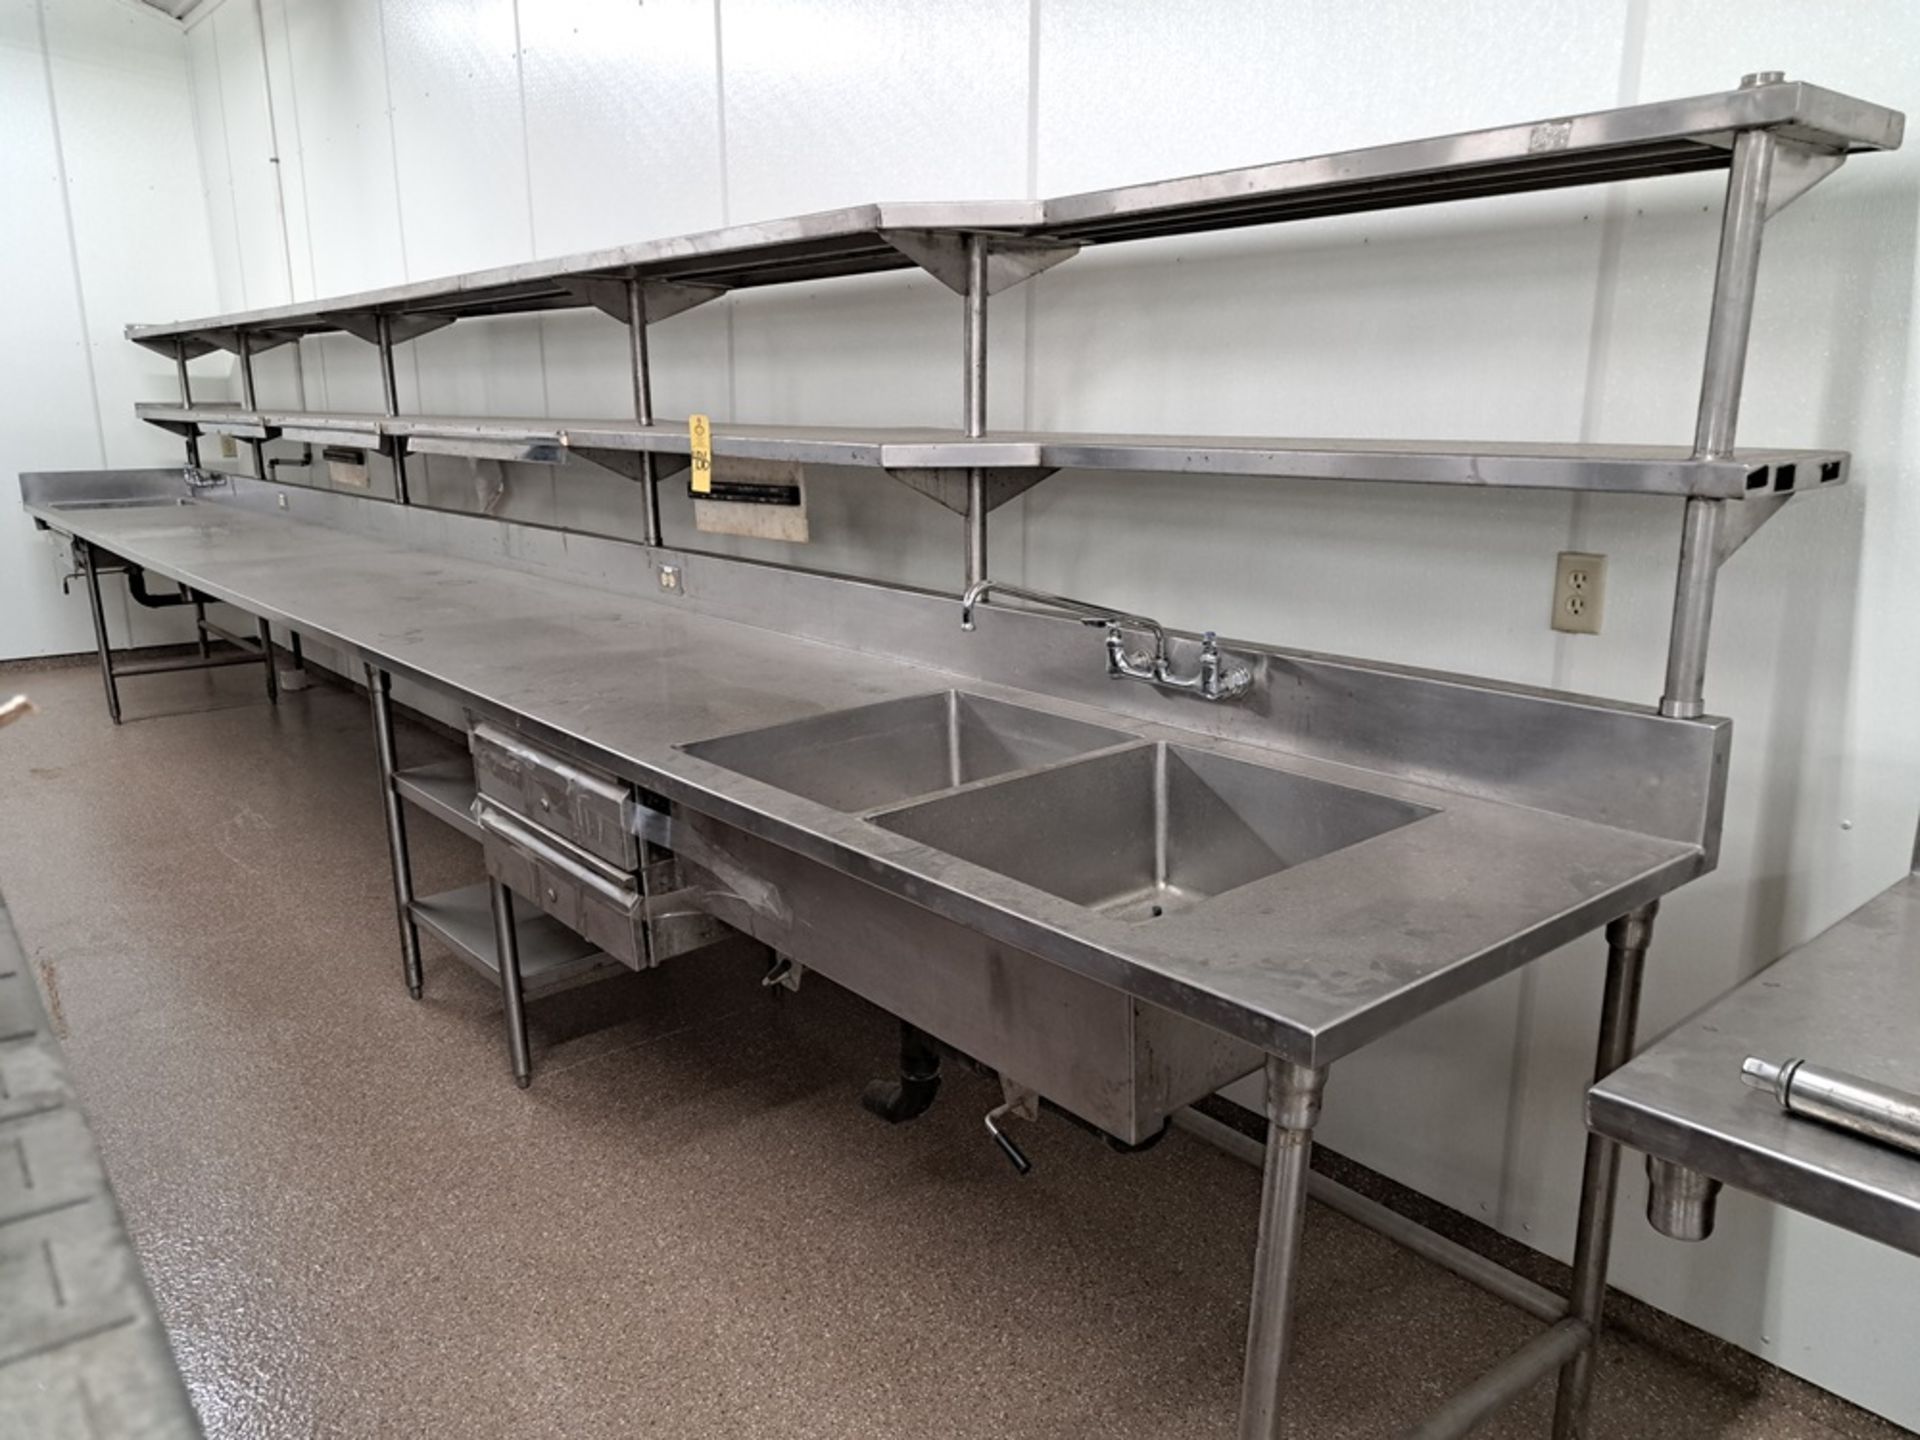 Stainless Steel Table, 42" wide X 26' long X 6' tall, (2) sinks, (2) overhead shelves, (3)